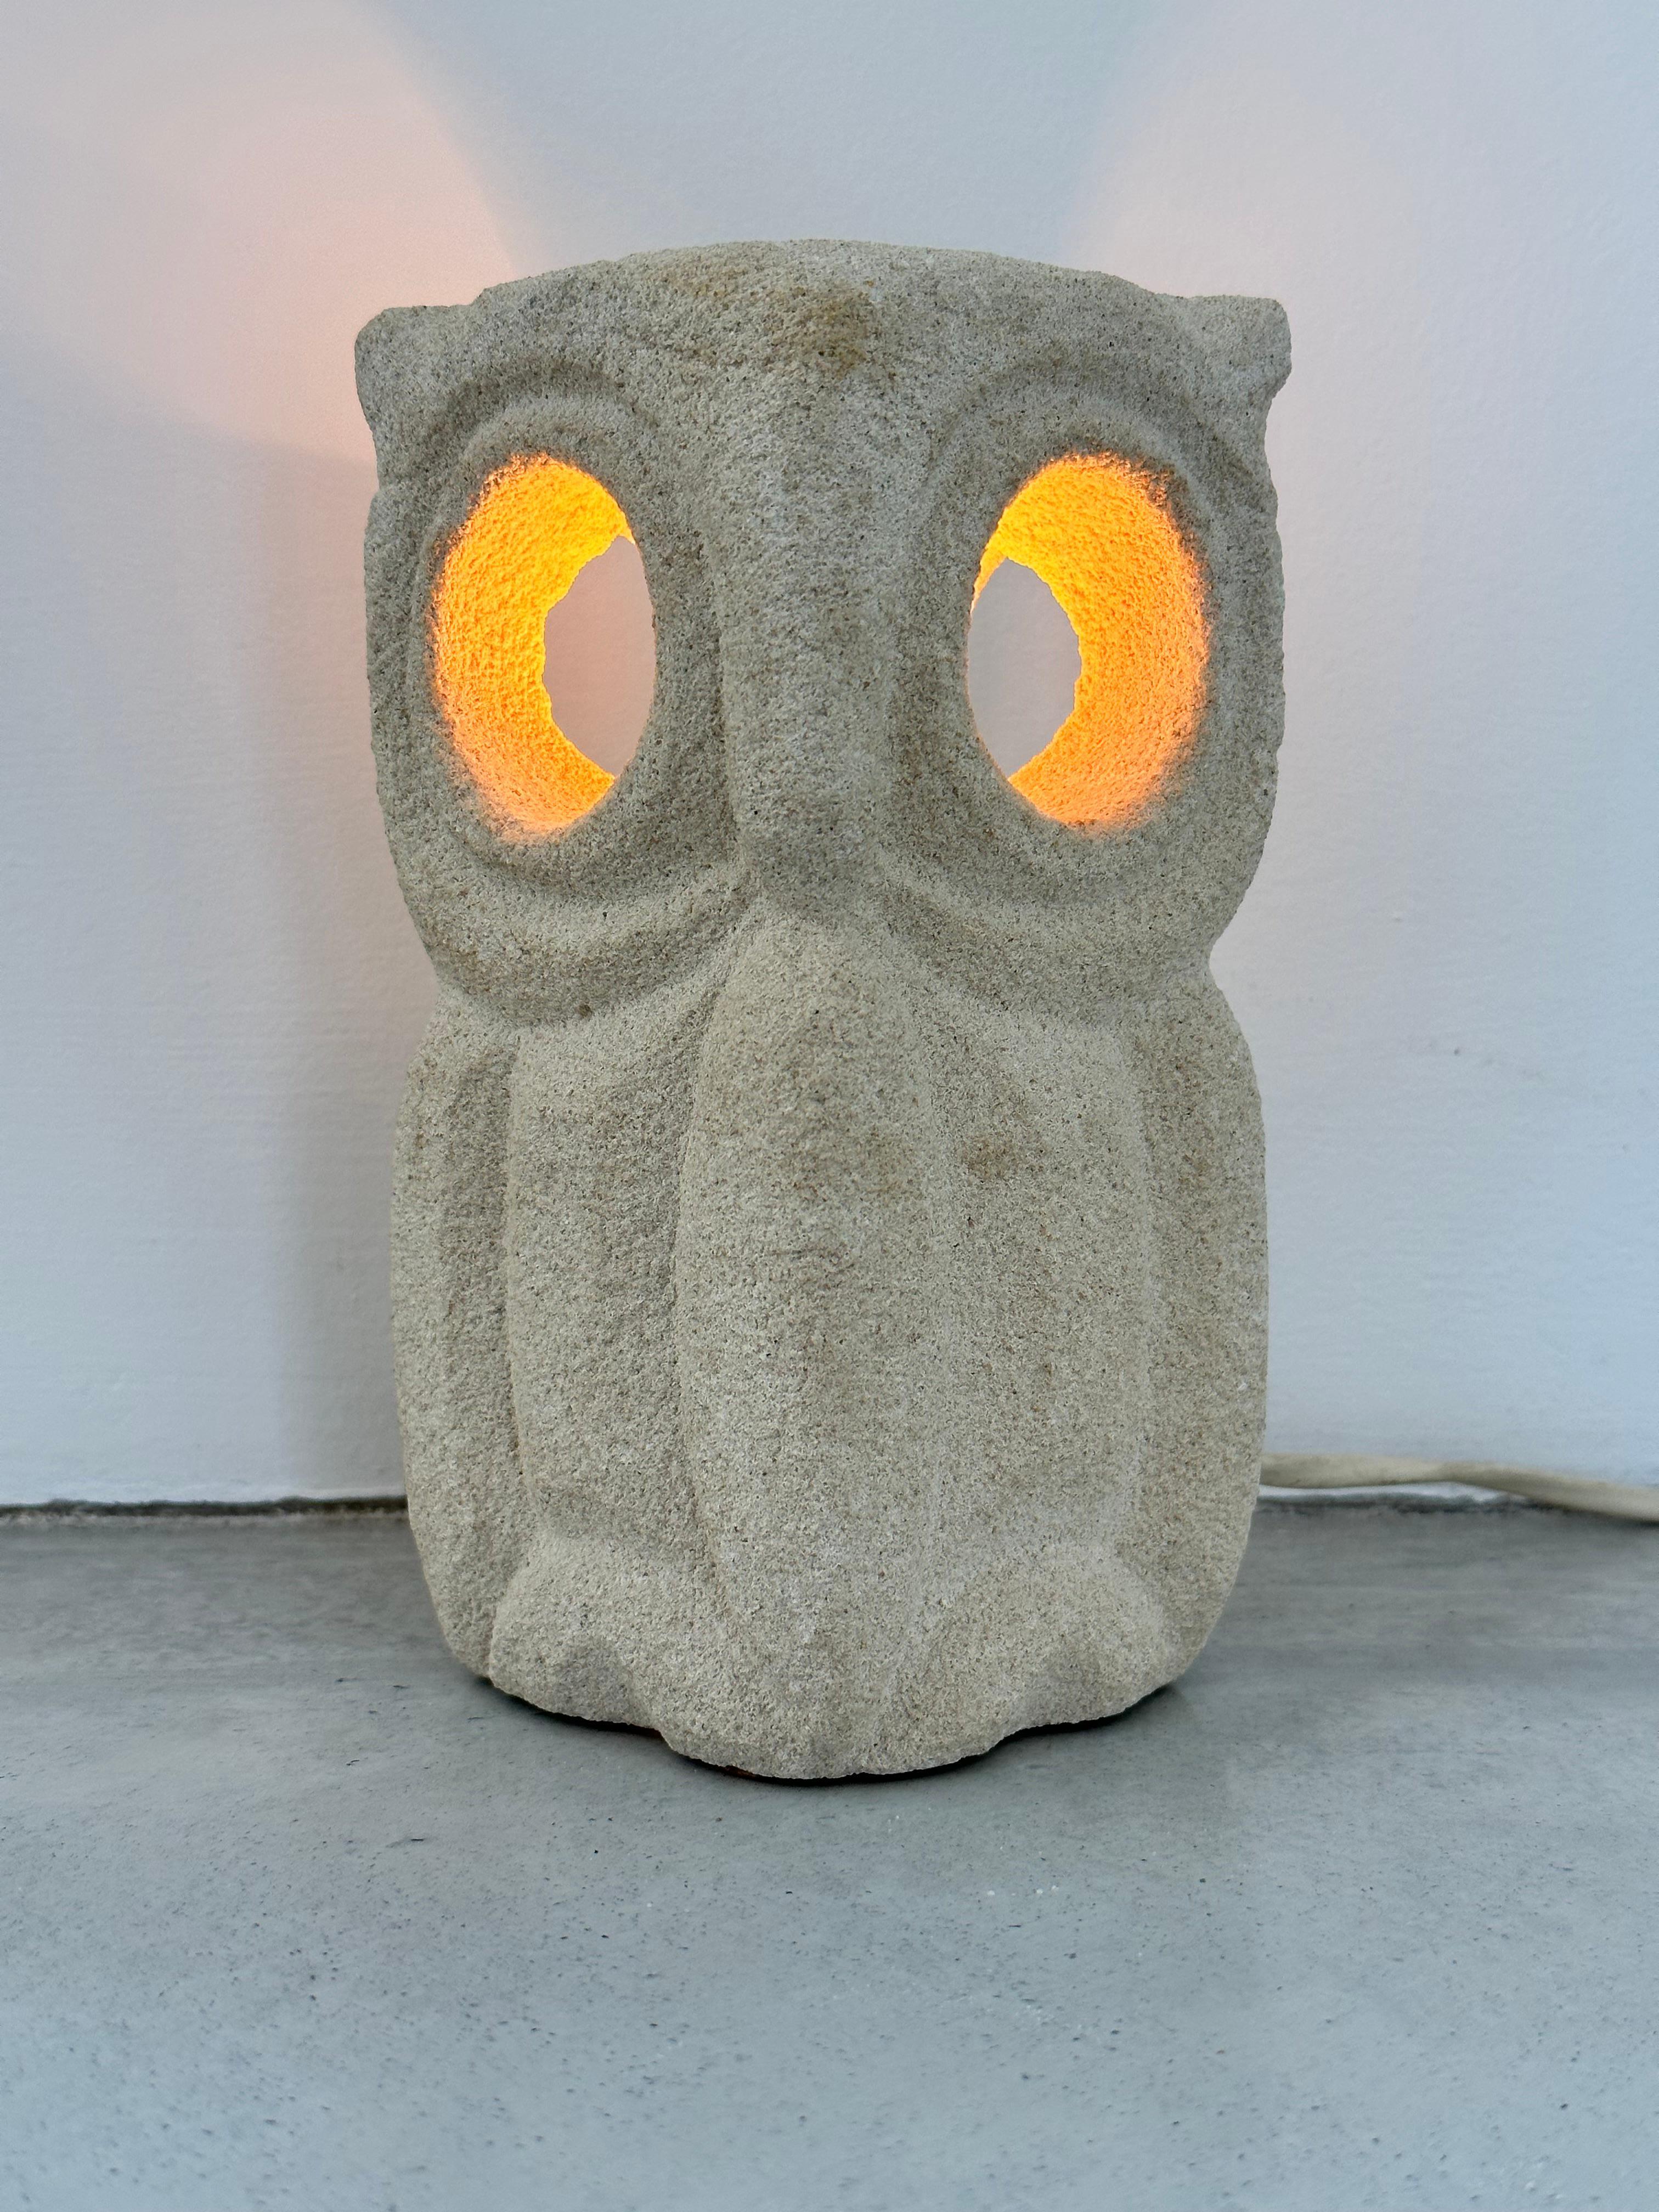 Superb Luberon stone lamp. The sculpture represents a stylized owl. It was meticulous work that required hours of work.

A soft, subdued light is diffused through the owl's eyes and the top of its head.

lamp in good condition.

Circa 1970s

Albert